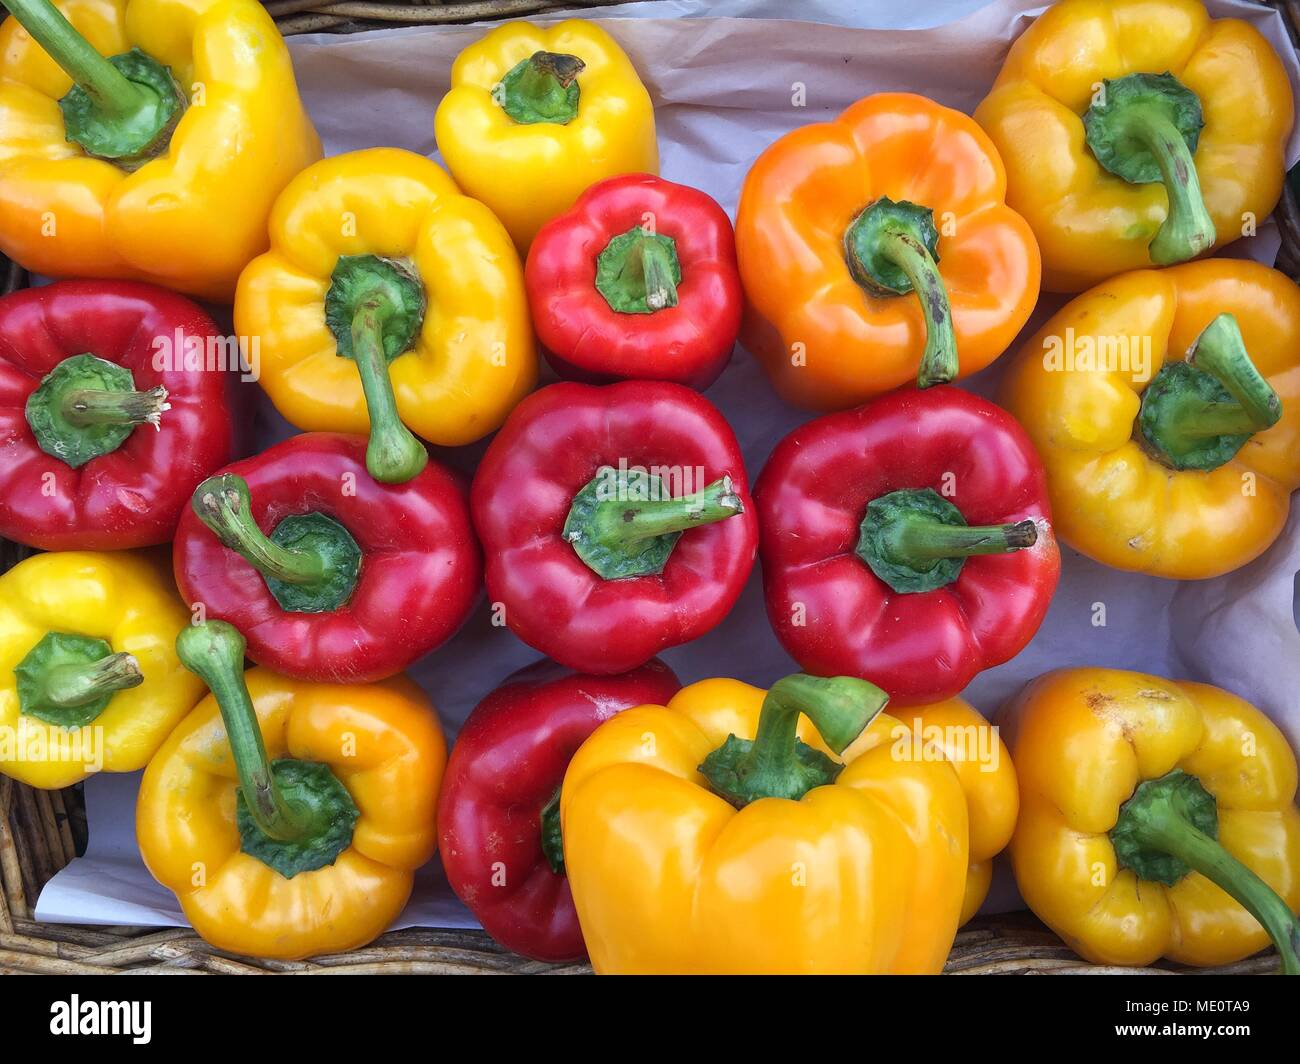 A basket full of colourful bell peppers in yellow, red and orange at an outdoor market stall Stock Photo